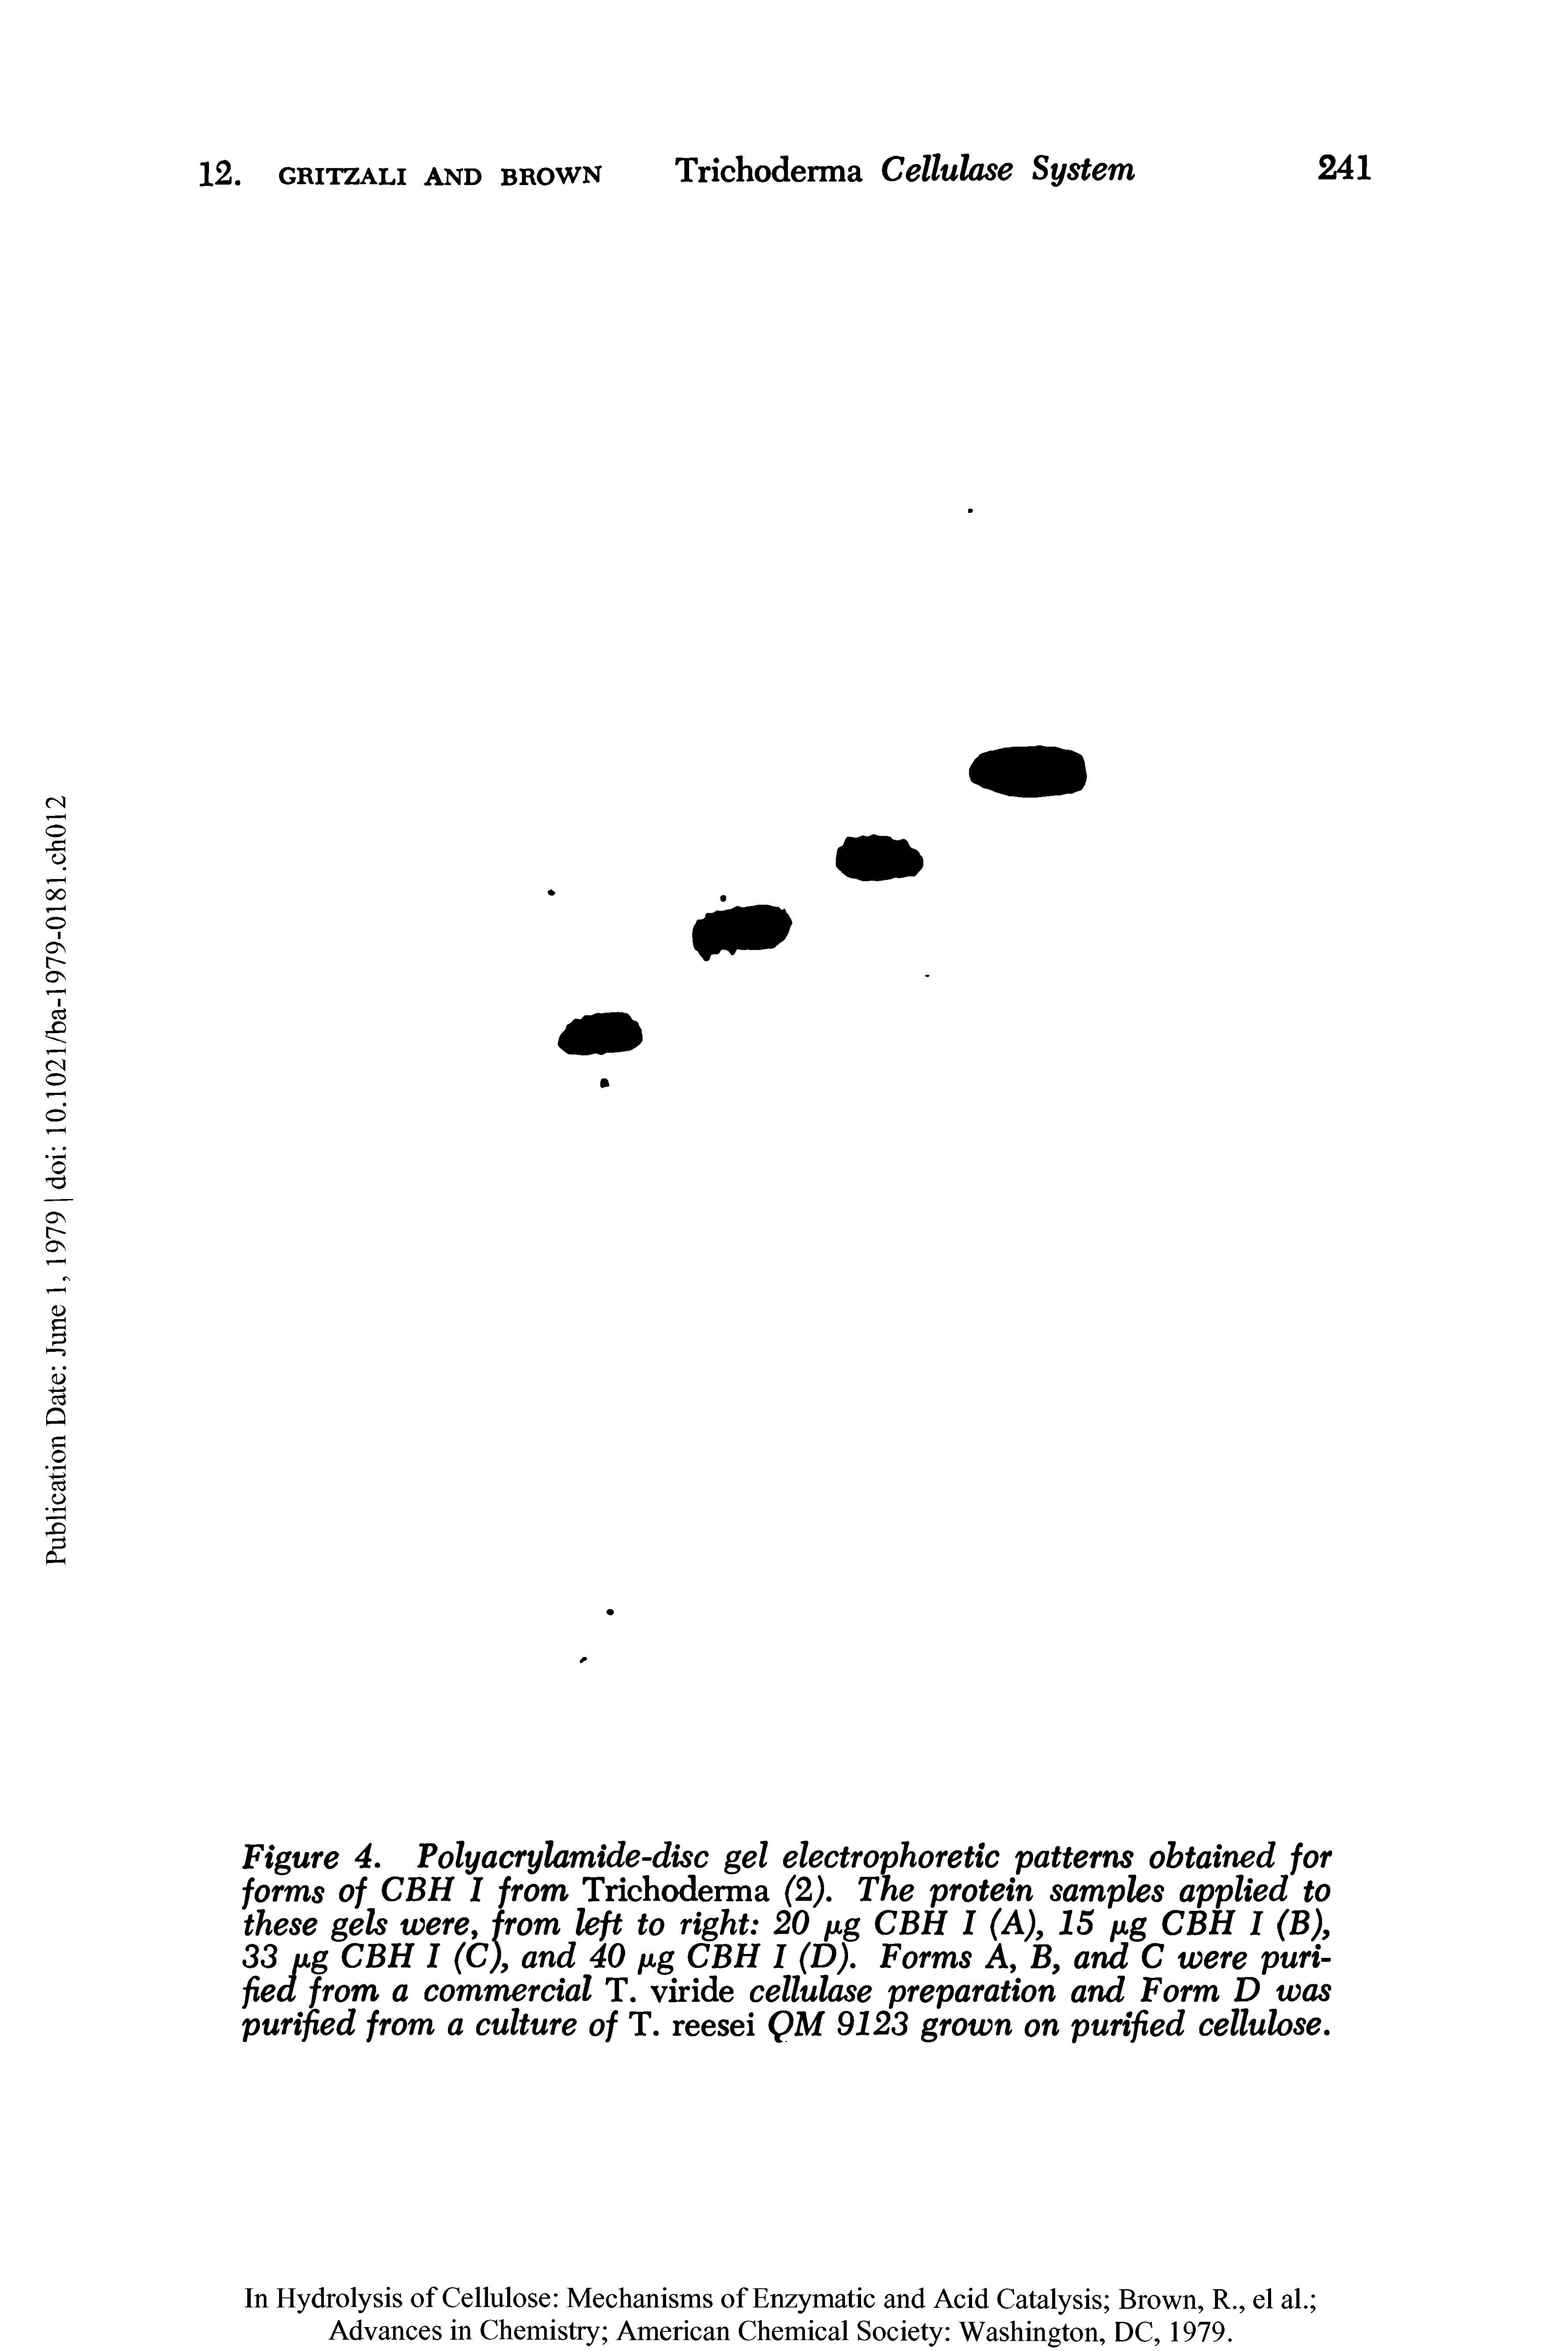 Figure 4. Poly acrylamide-disc gel electrophoretic patterns obtained for forms of CBH I from Trichoderma (2). The protein samples applied to these gels were, from left to right 20 fxg CBH I (A), 15 fig CBH I (B), 33 jig CBH I (C), and 40 fig CBH 1 (D). Forms A, B, and C were purified from a commercial T. viride cellulose preparation and Form D was purified from a culture of T. reesei QM 9123 grown on purified cellulose.